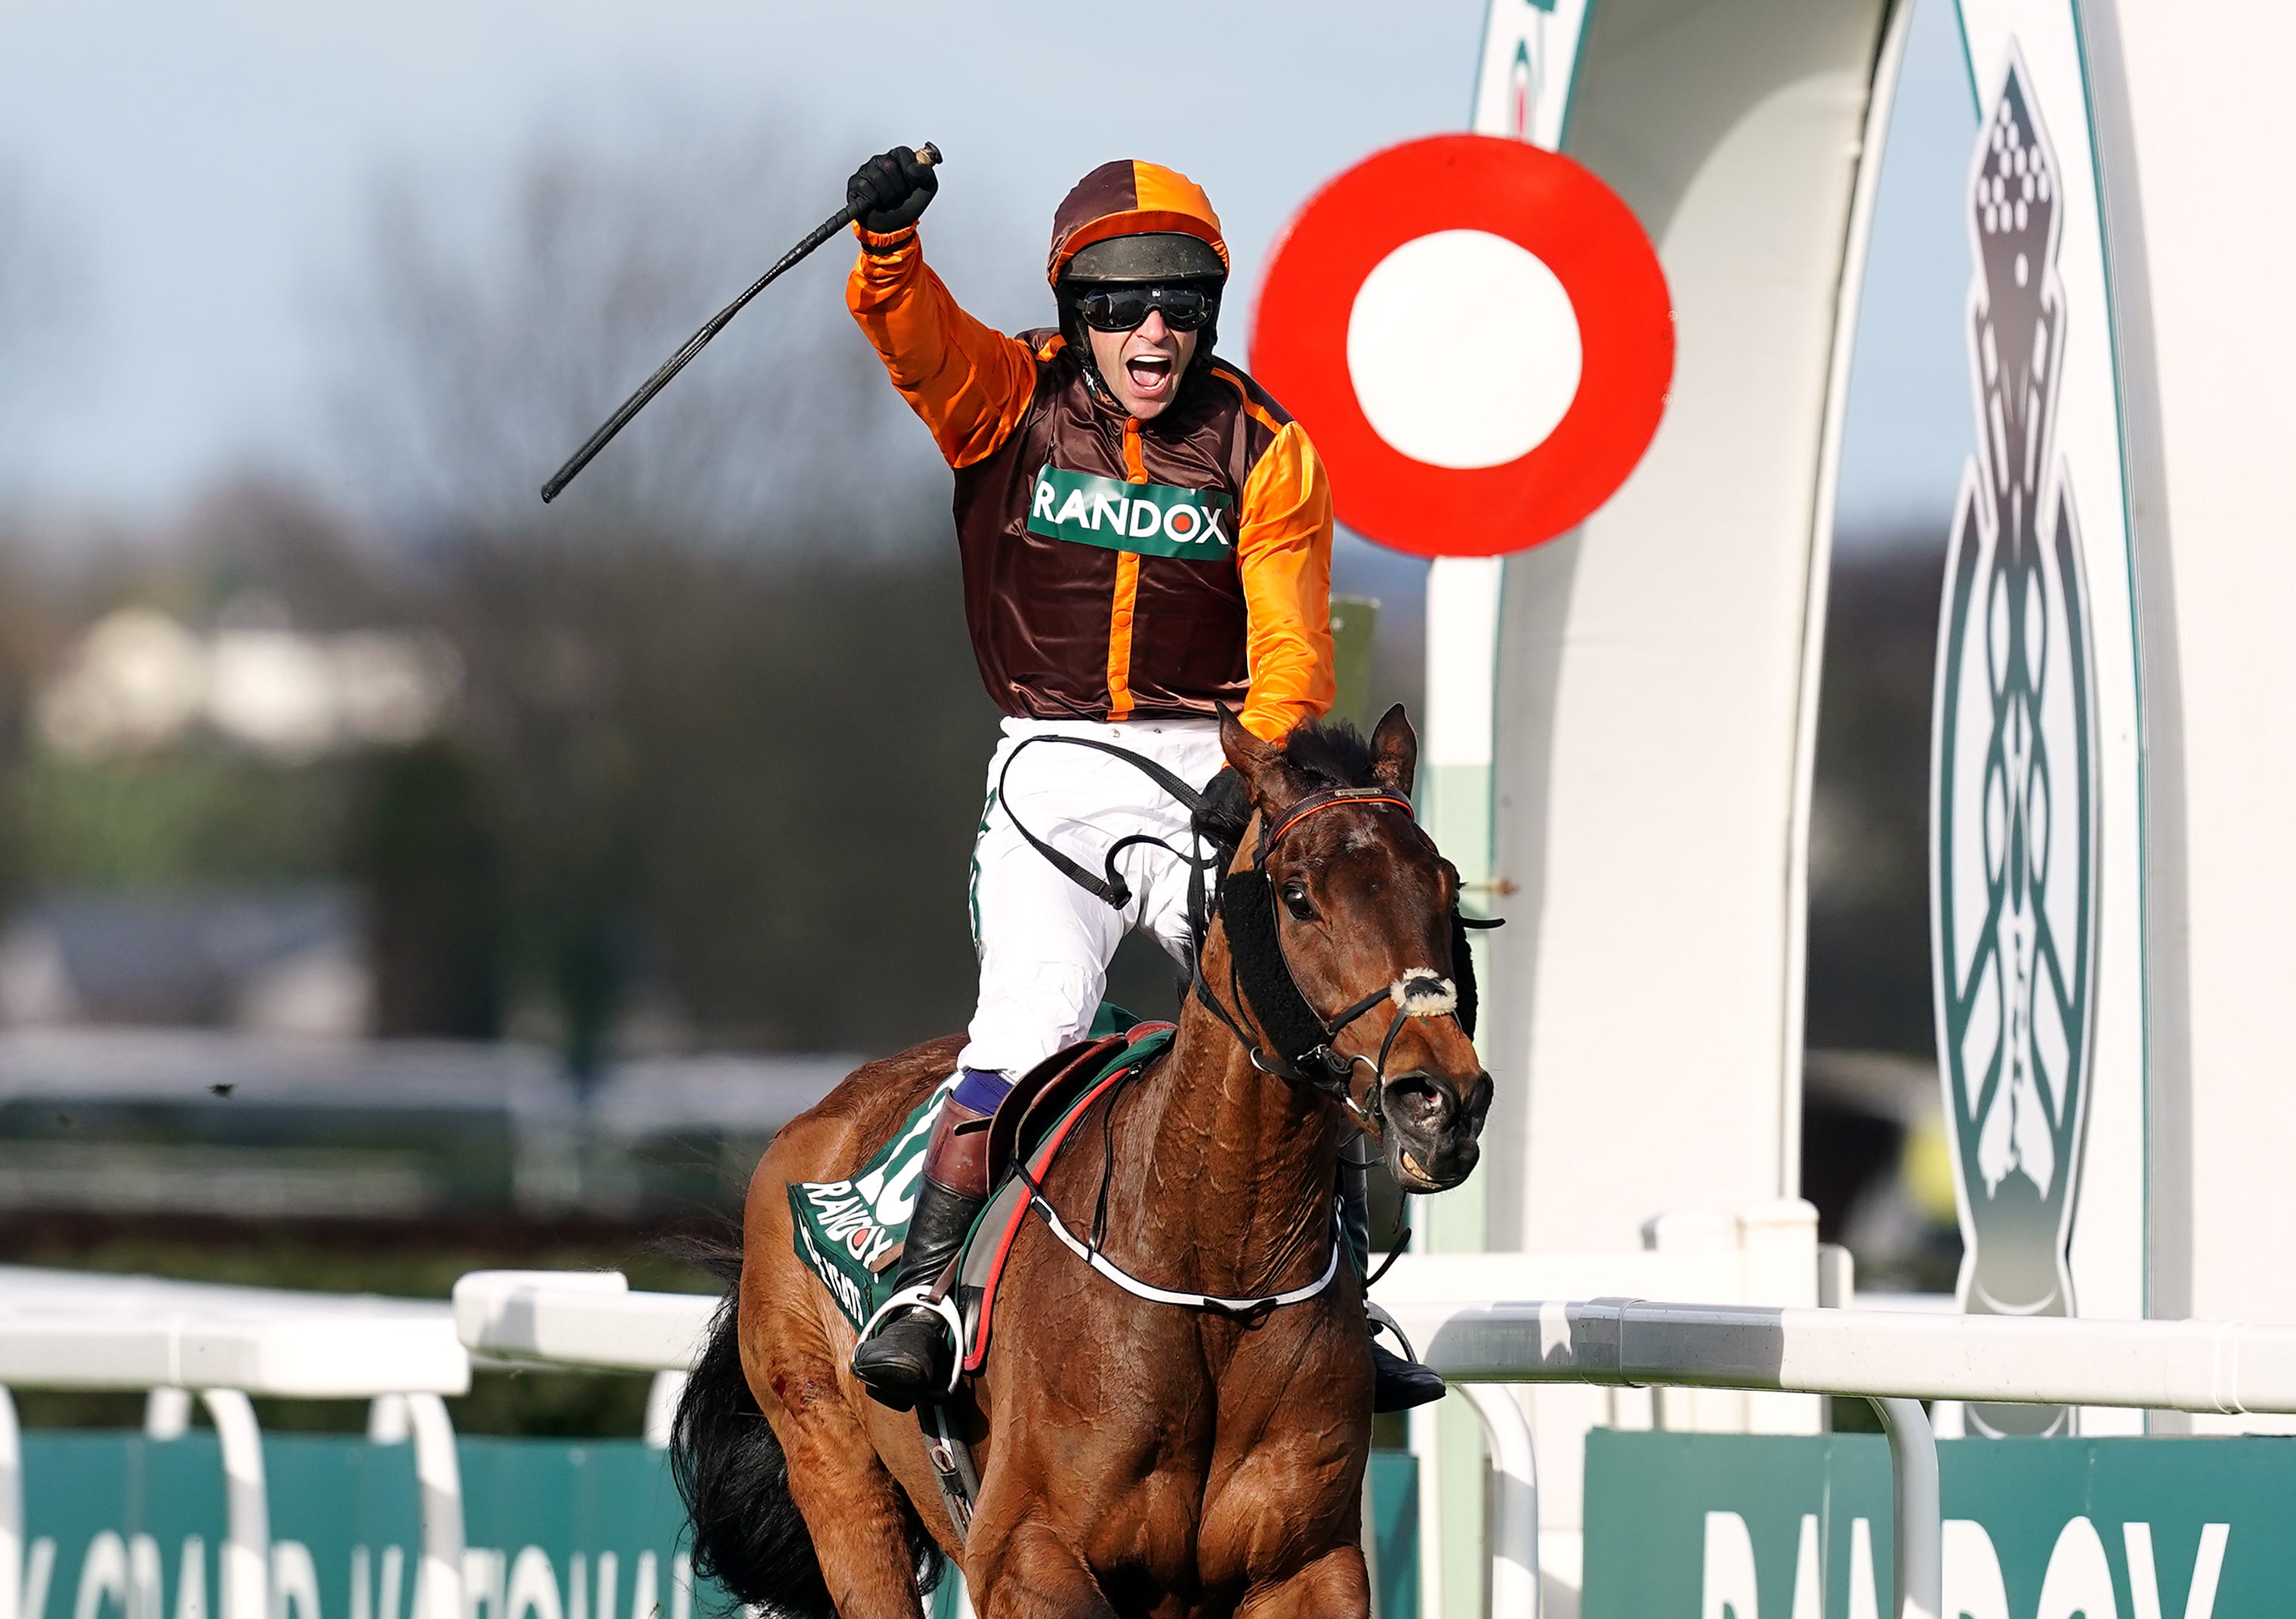 Waley-Cohen celebrates his Grand National triumph in his final ride on Noble Yeats, which was bought by his father Robert Waley-Cohen earlier this year (David Davies/PA)